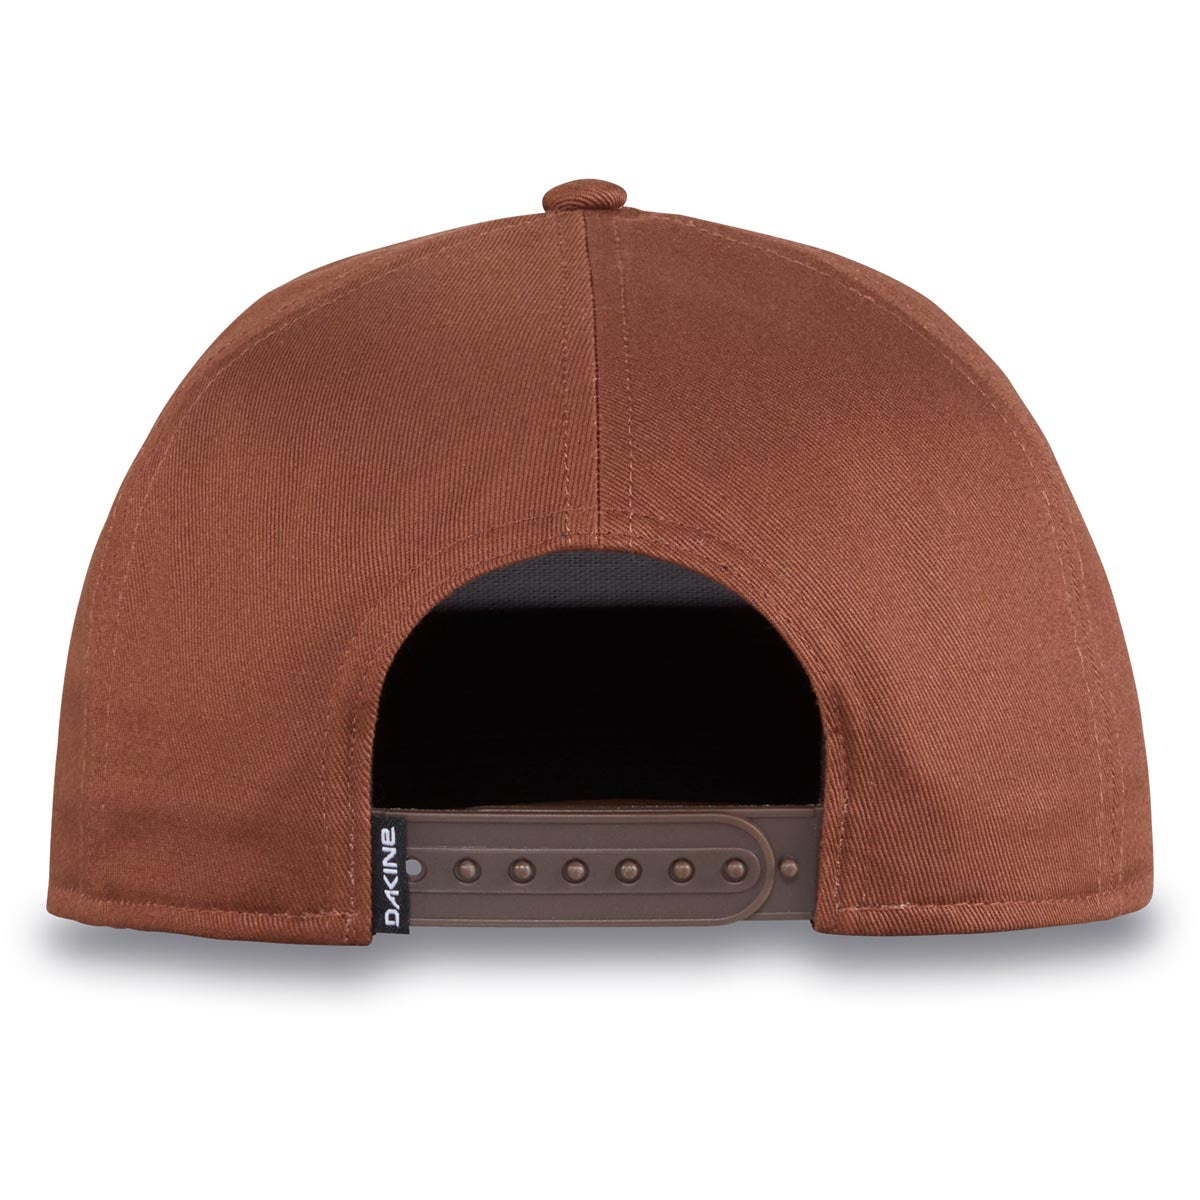 Dakine All Sports Patch Ball Hat - Cappuccino image 2